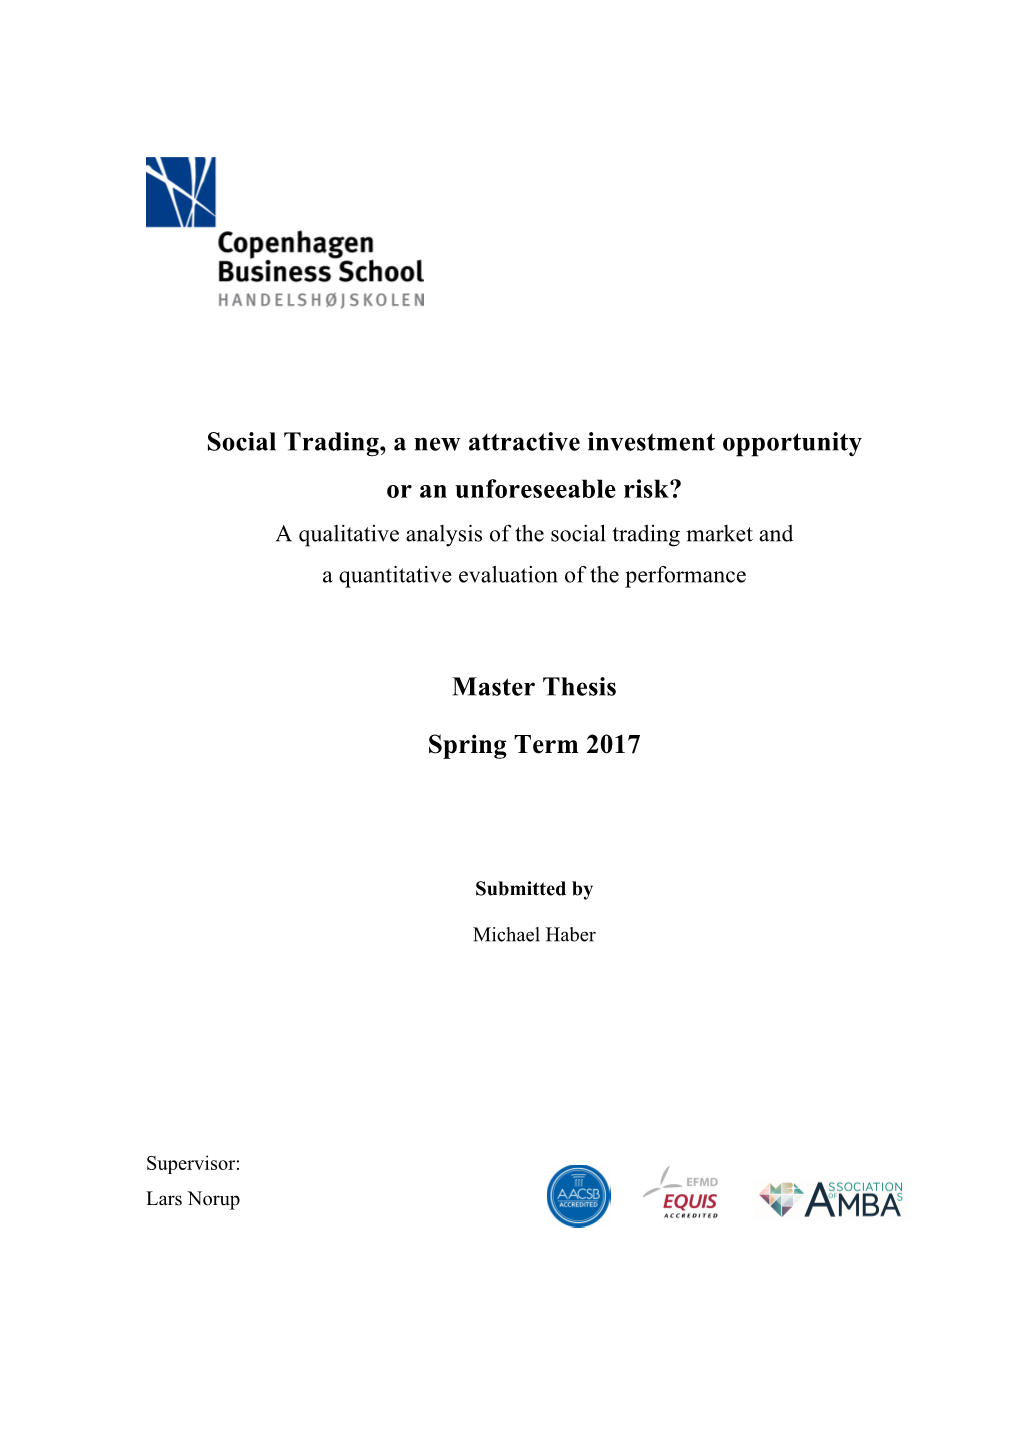 Social Trading, a New Attractive Investment Opportunity Or An